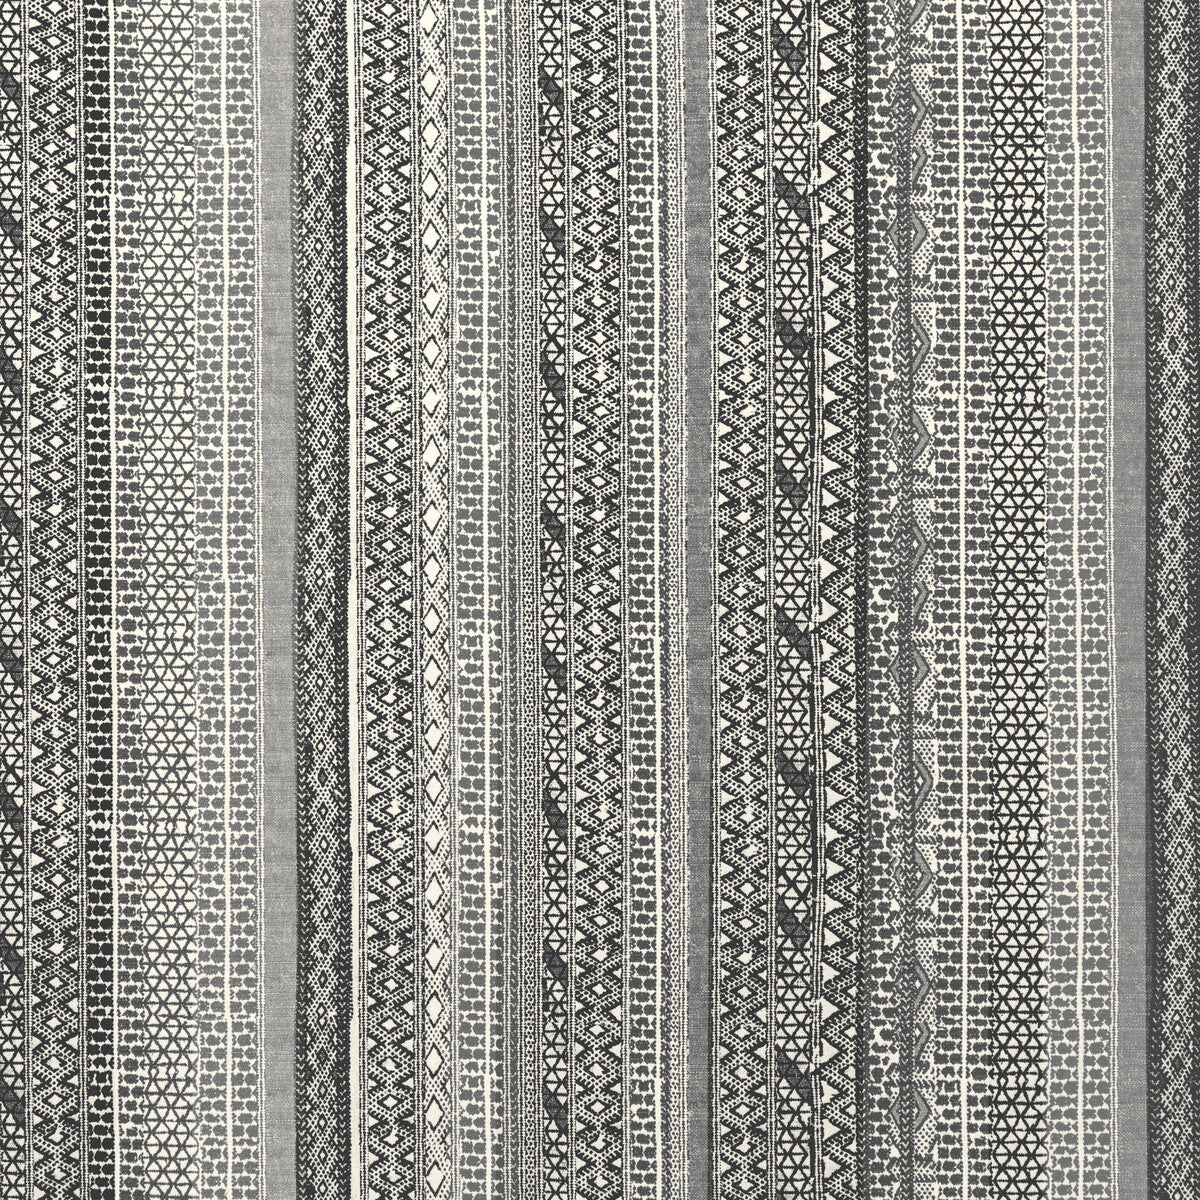 Hakan fabric in grey color - pattern 2012100.21.0 - by Lee Jofa in the Breckenridge collection